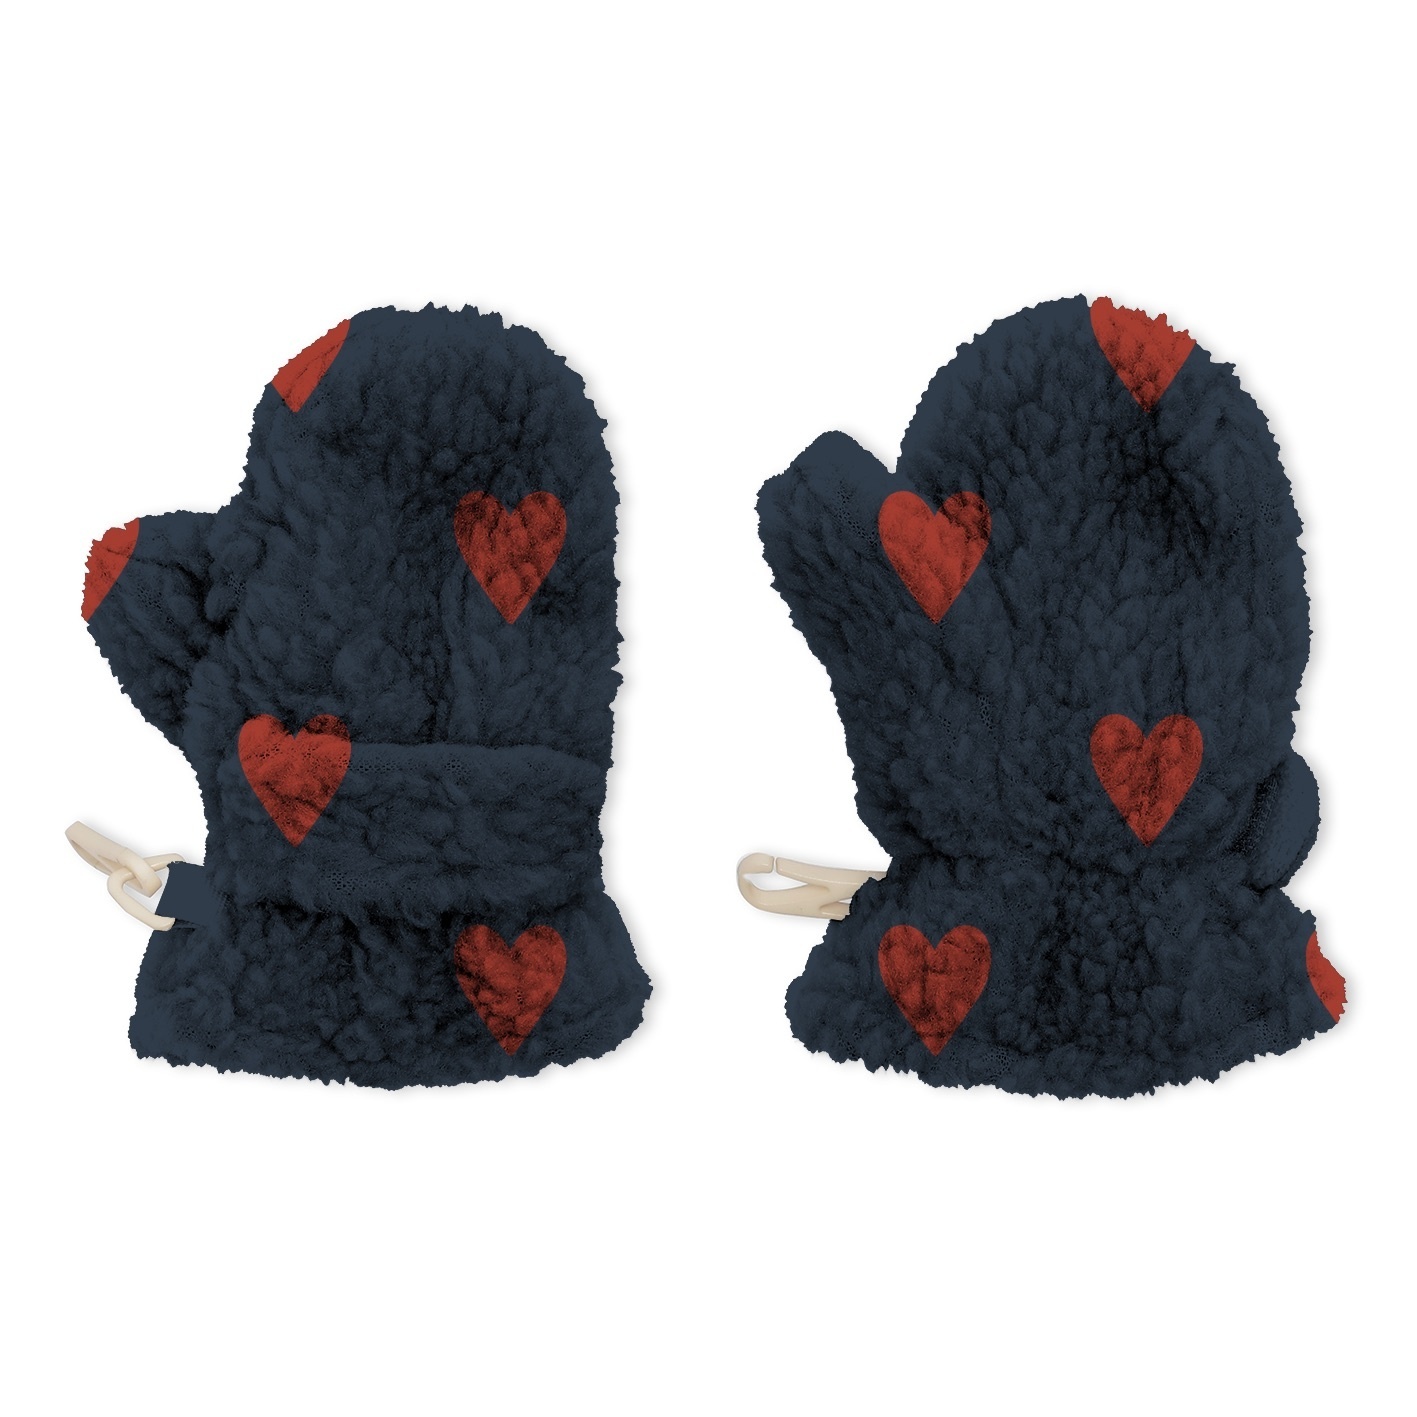 GRIZZ TEDDY BABY MITTENS - MON AMOUR-2